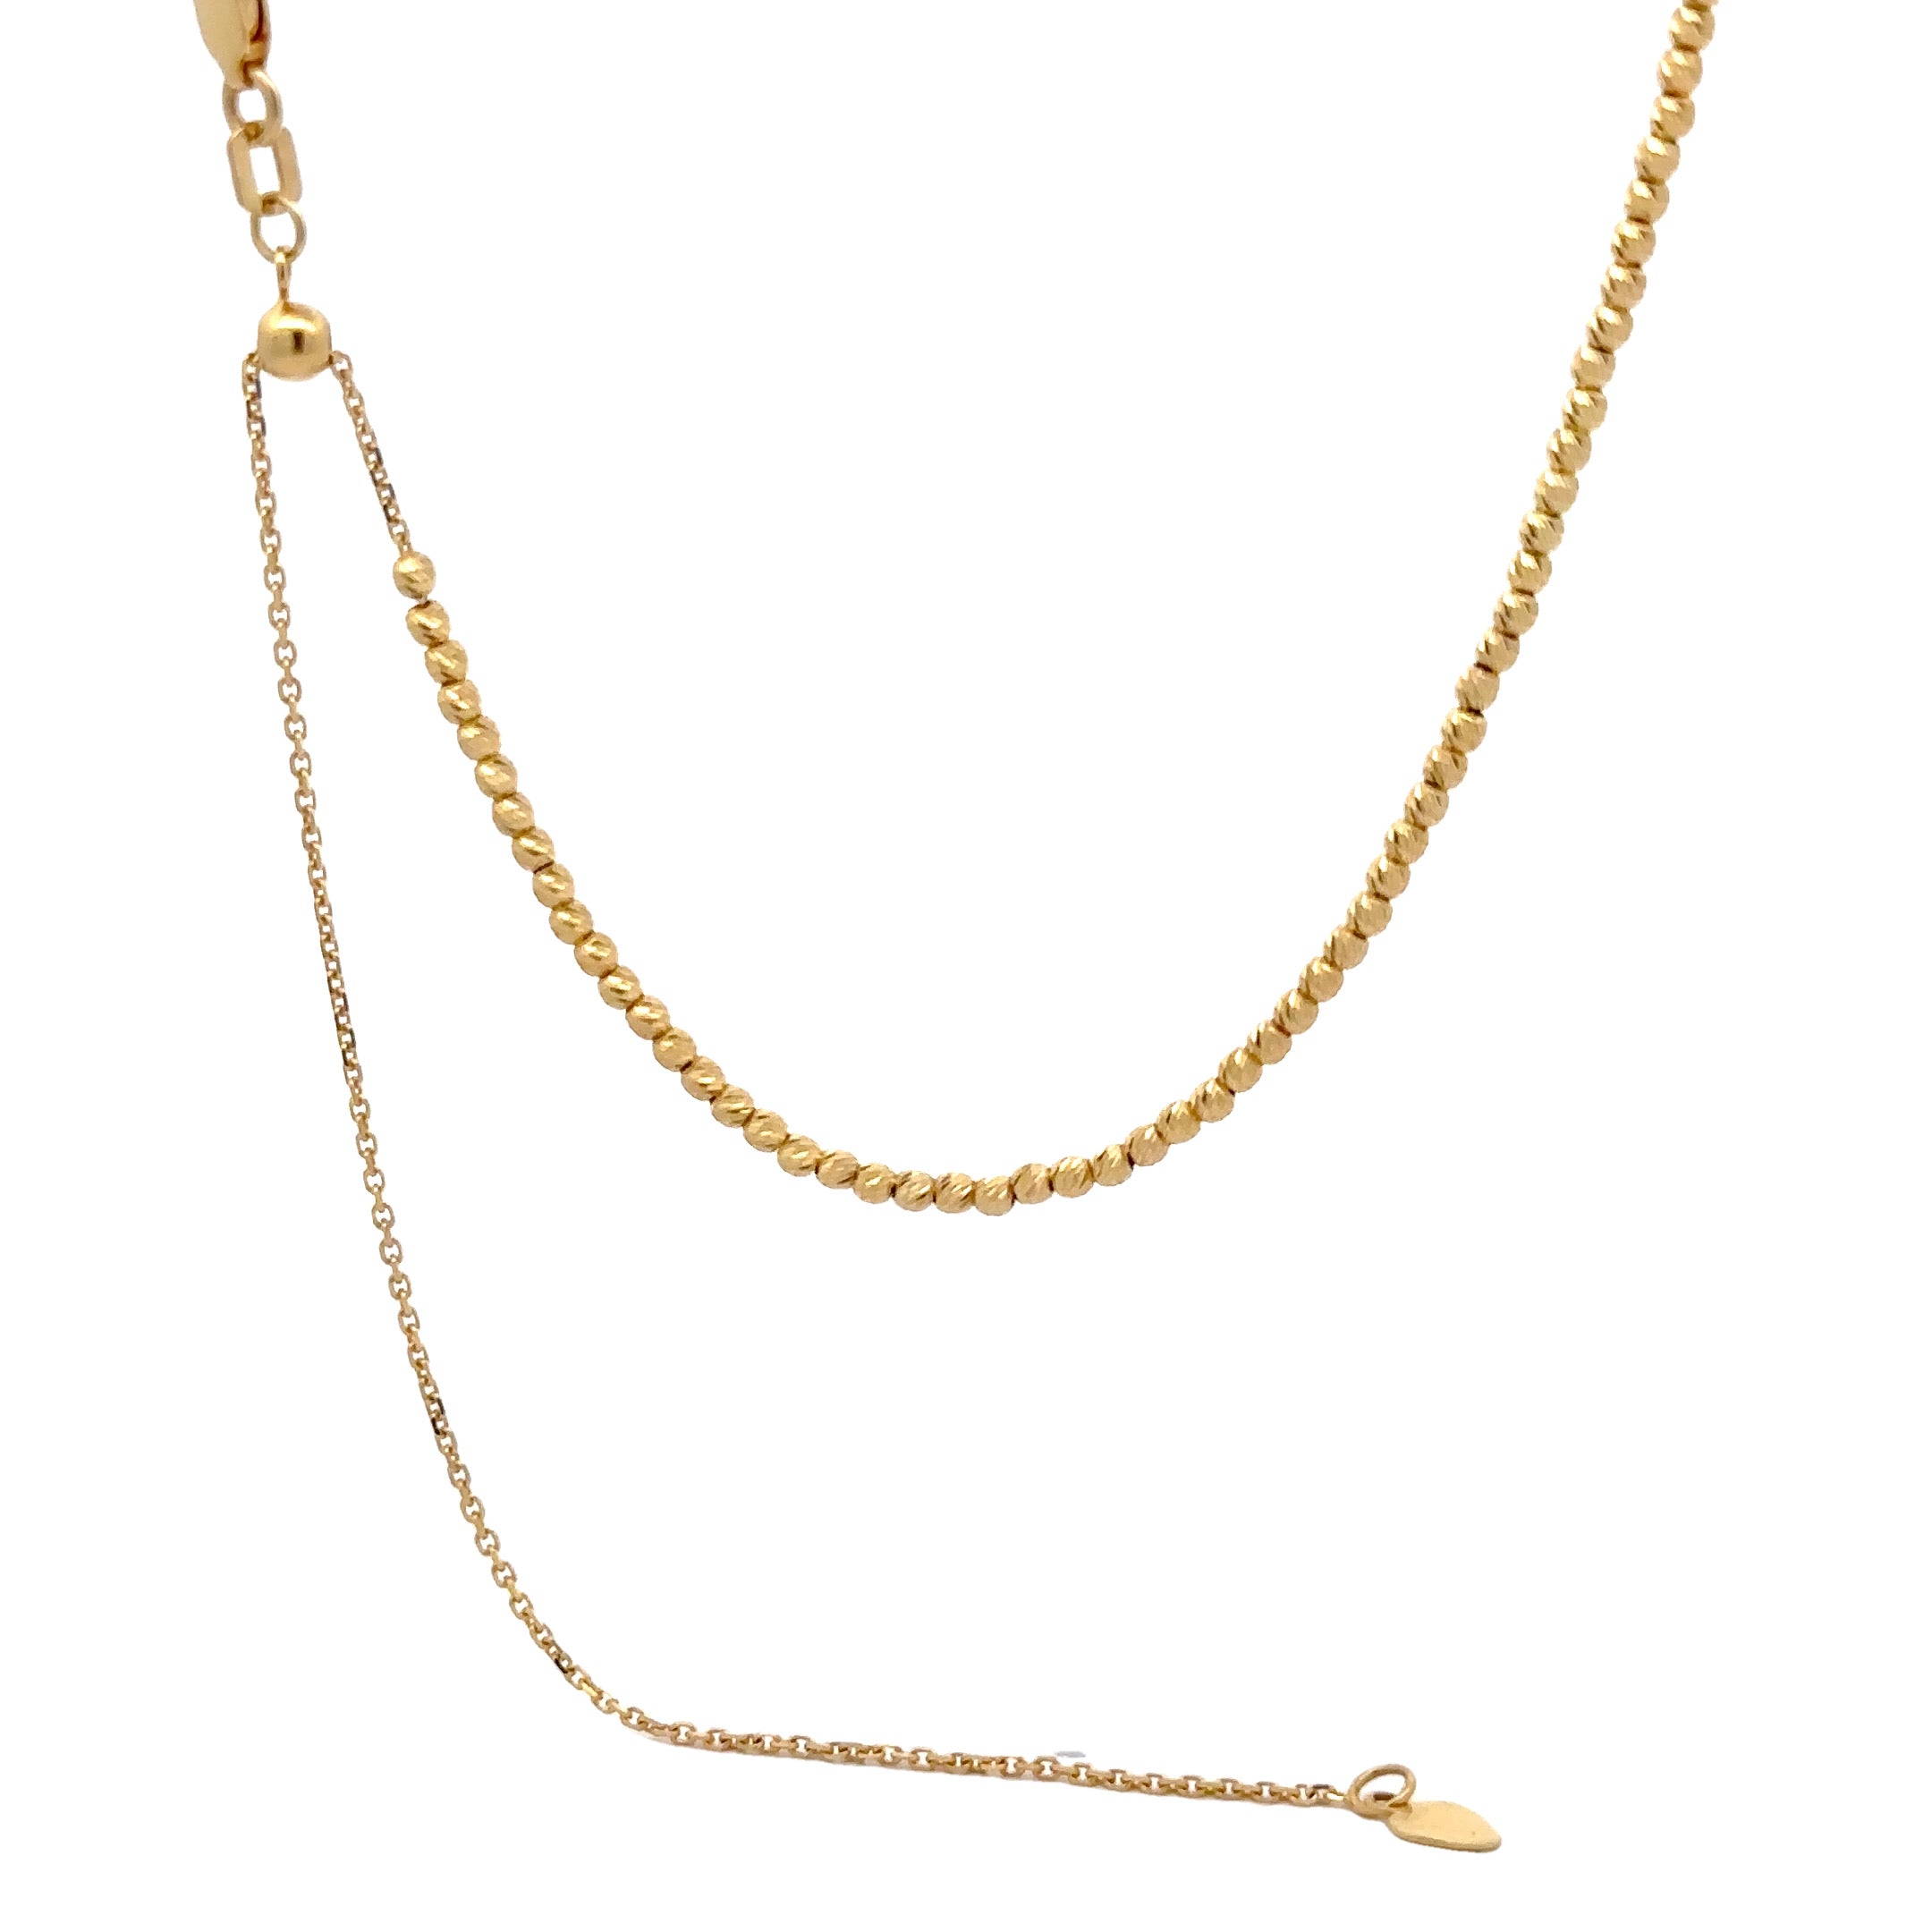 WD1265 14kt Gold adjustable faceted bead ball chain